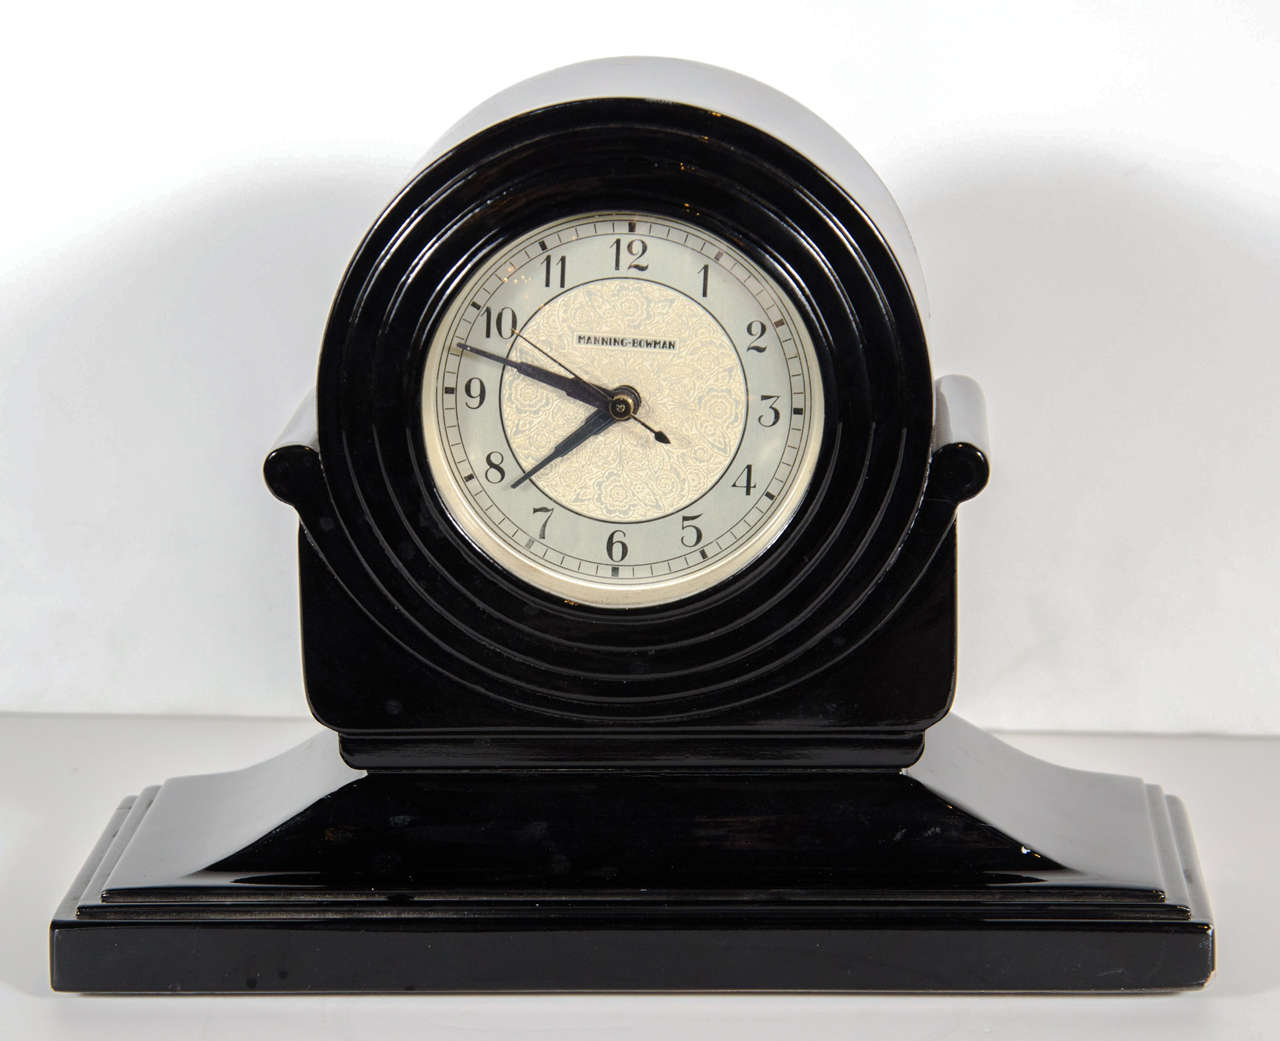 This gorgeous Black lacquer clock features original gilt and black  numerical face with stylized Art Deco numbers. The face of the clock is concentric Skyscraper style rings on a lyre pedestal platform design.Movement has been replaced with a new